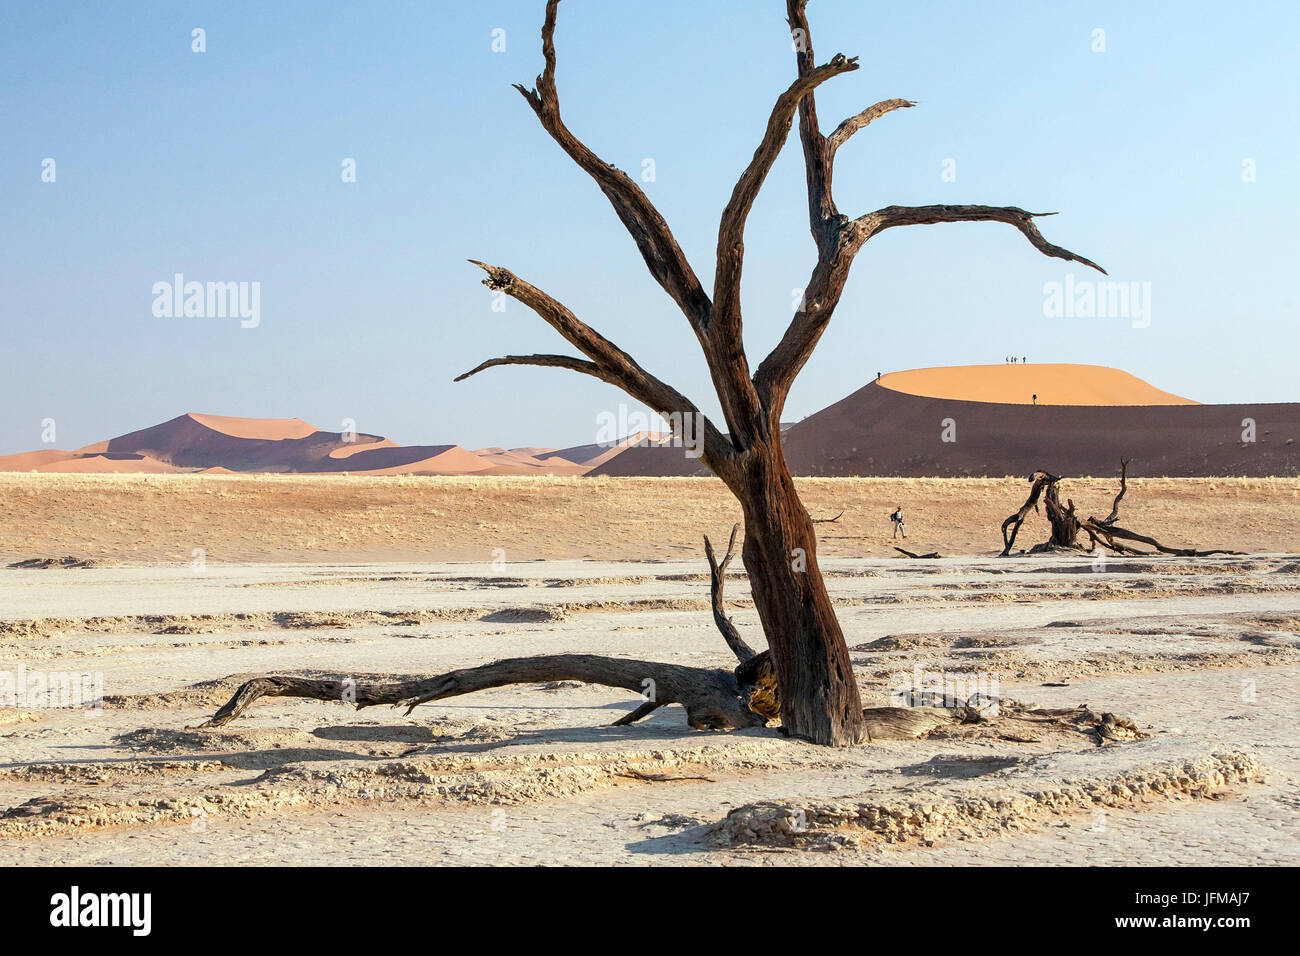 Parched ground and Dead Acacia surrounded by sandy dunes Deadvlei Sossusvlei Namib Desert Naukluft National Park Namibia Africa Stock Photo